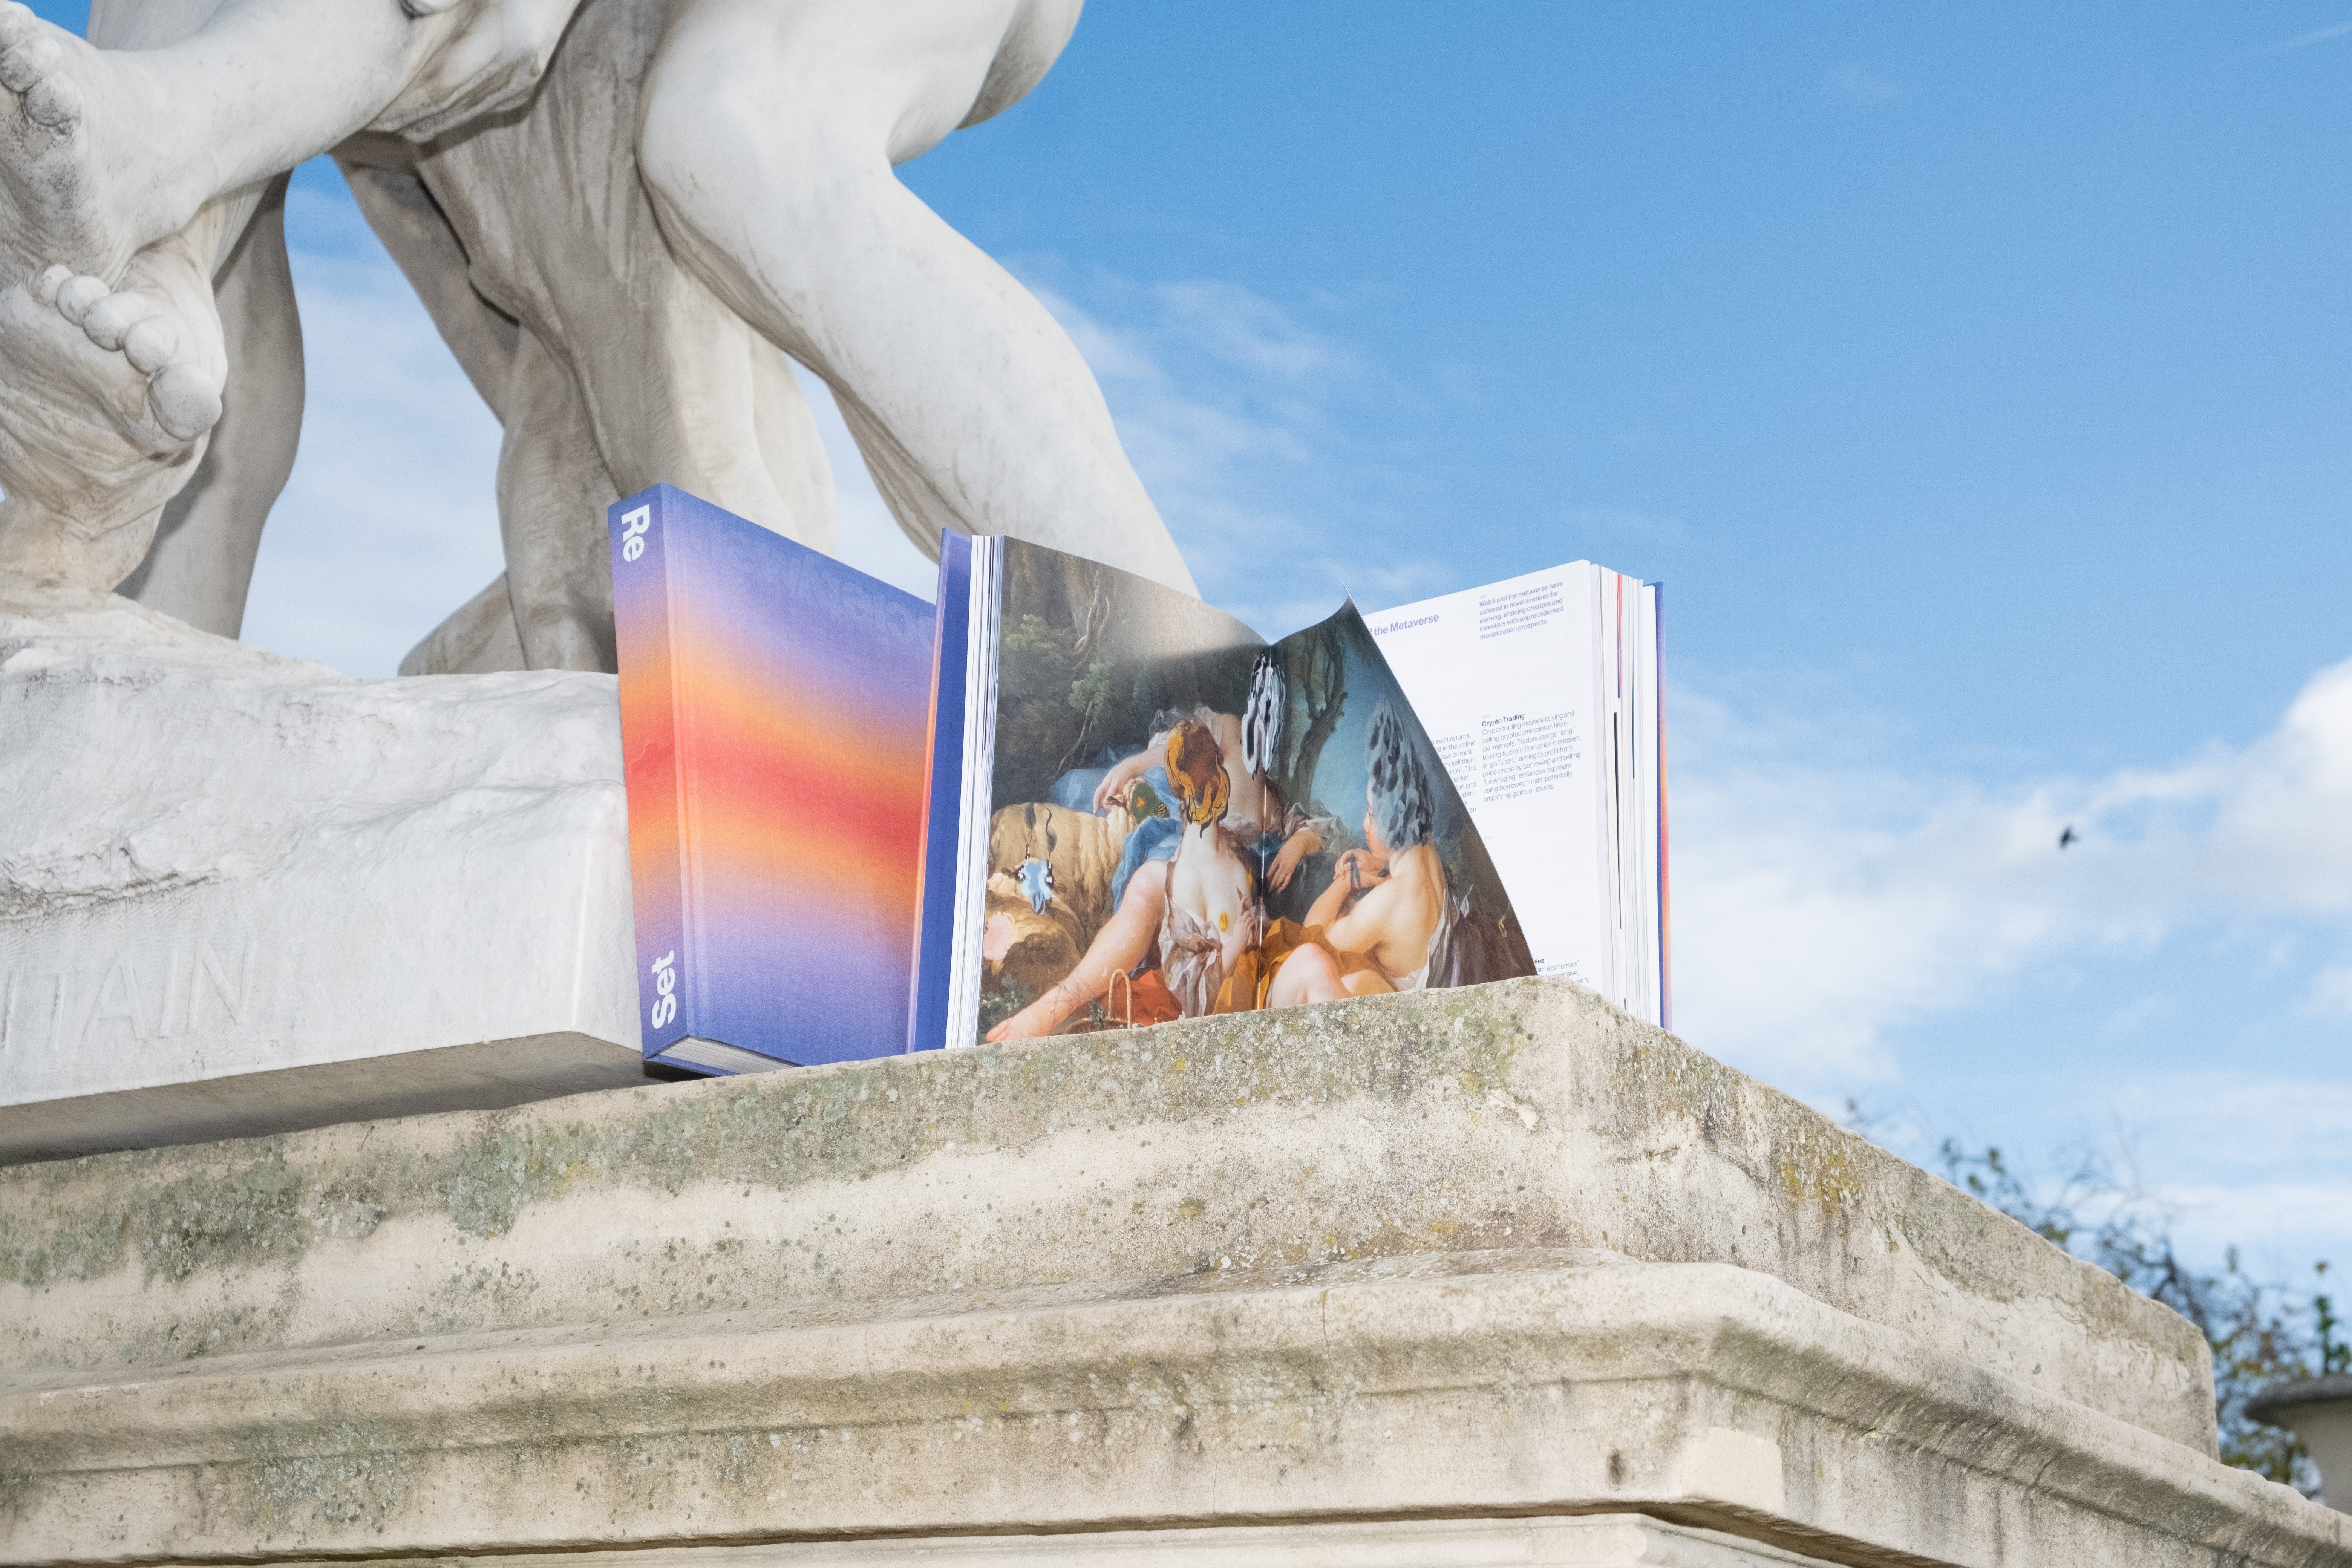 An incredible photograph of the book New Society in a stylized form under a statue